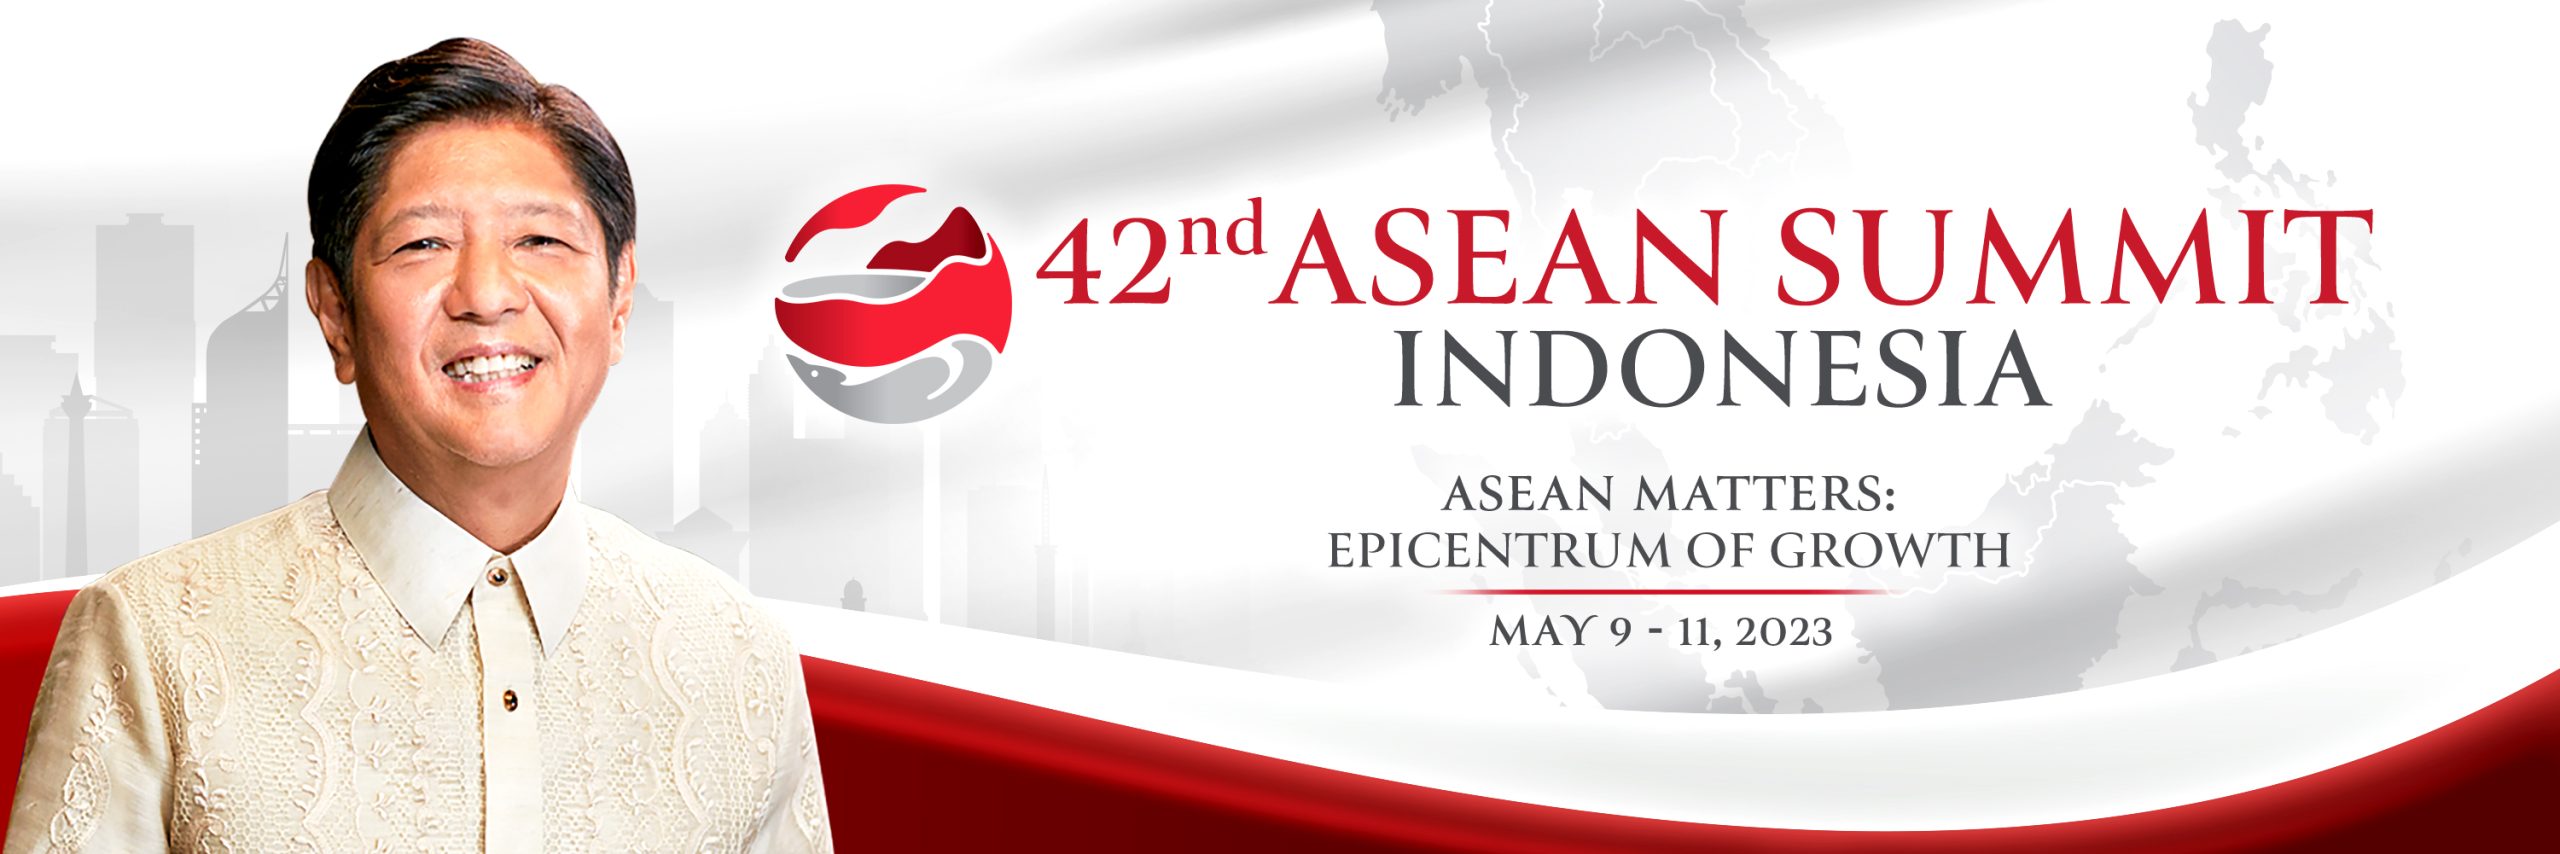 PBBM reports successful participation to 42nd ASEAN Summit in Indonesia